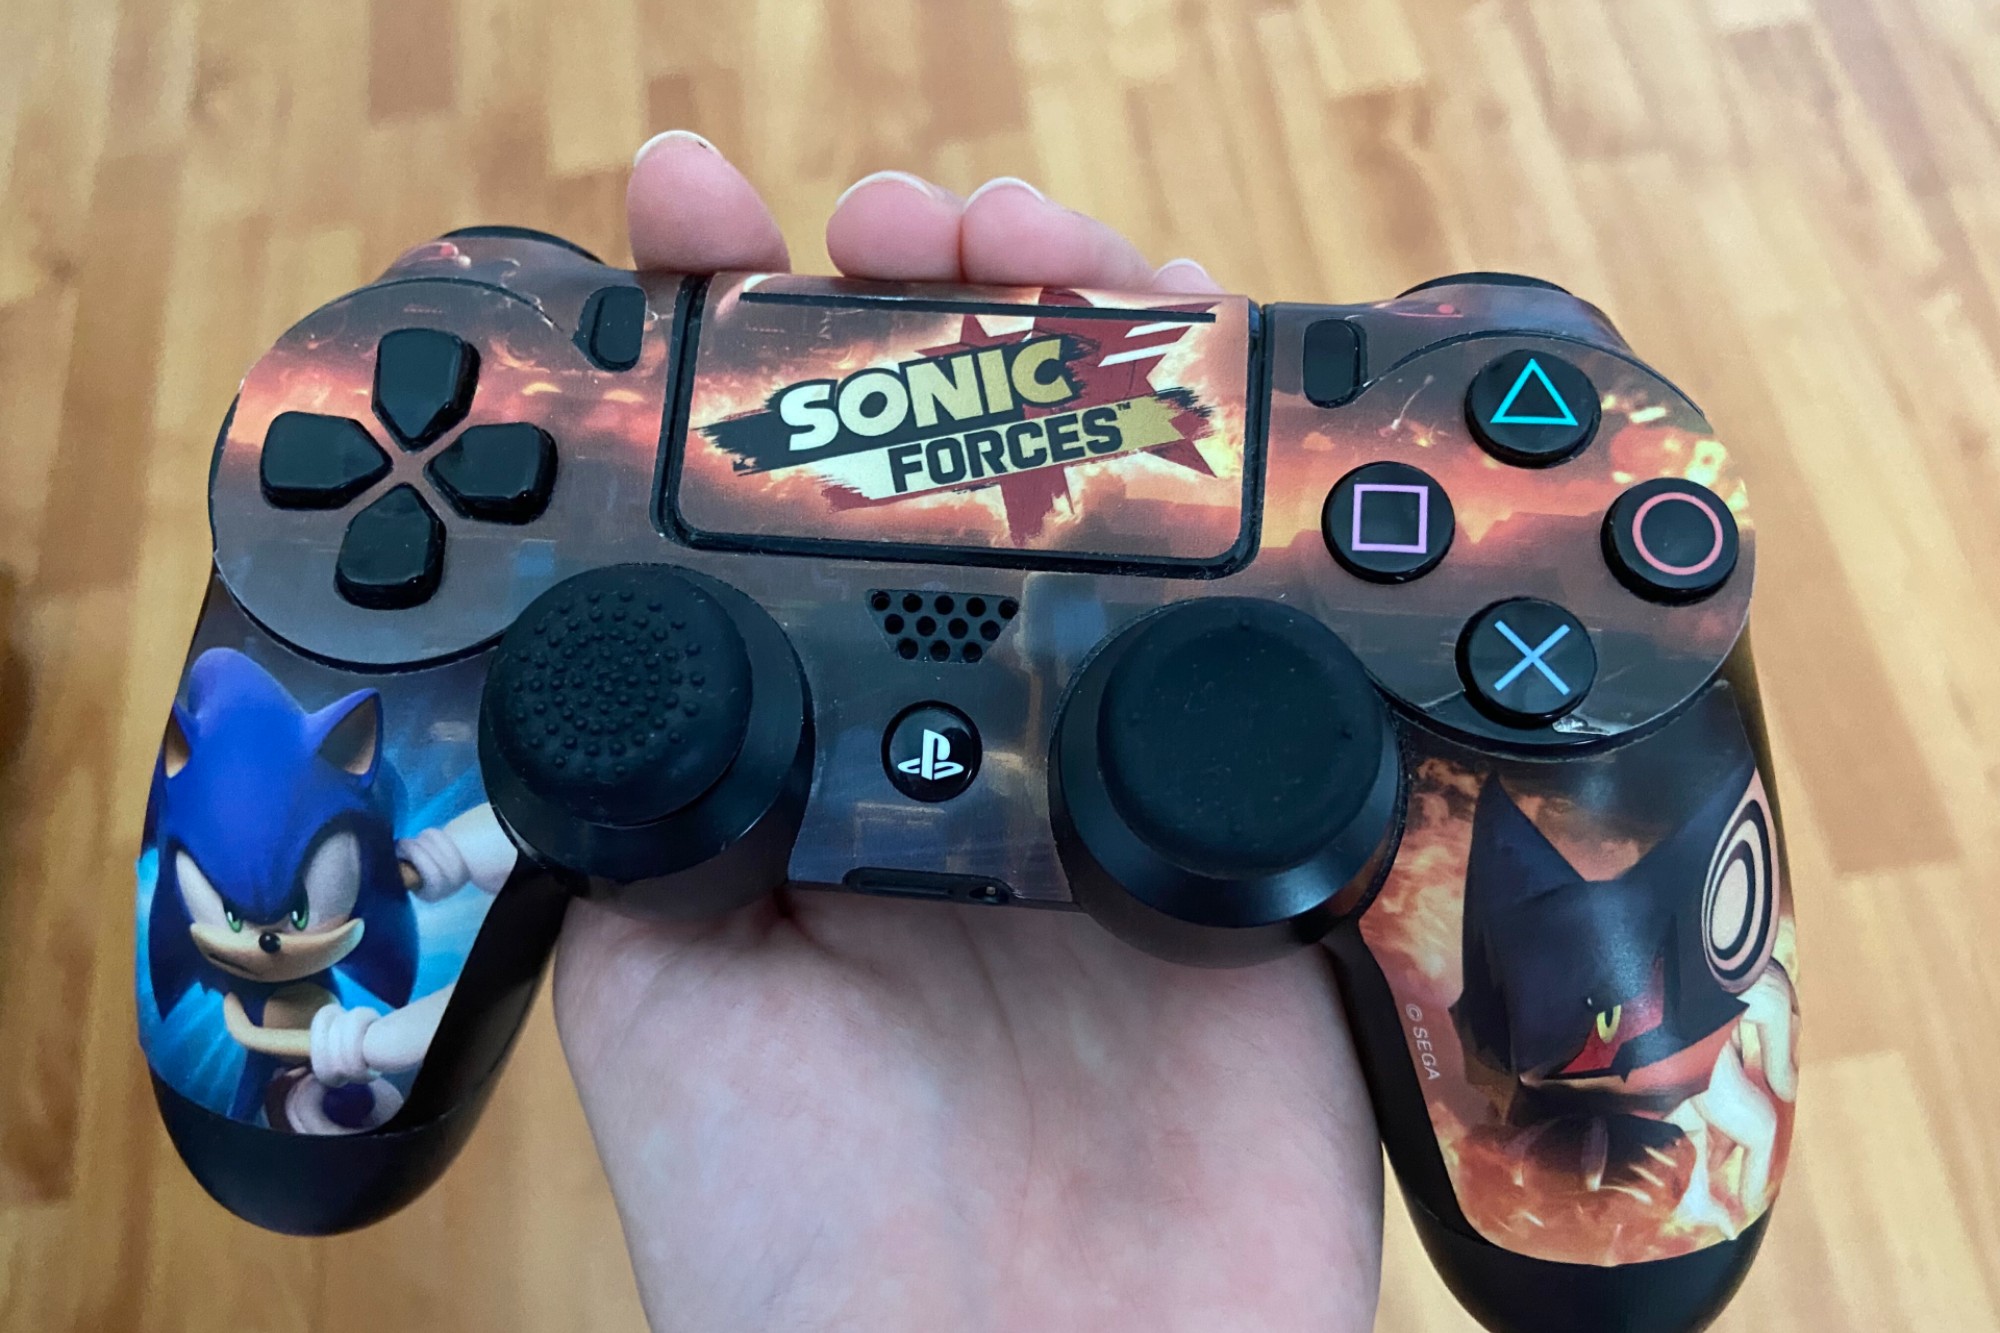 SEGA - Sonic Frontiers for Sony Playstation PS5